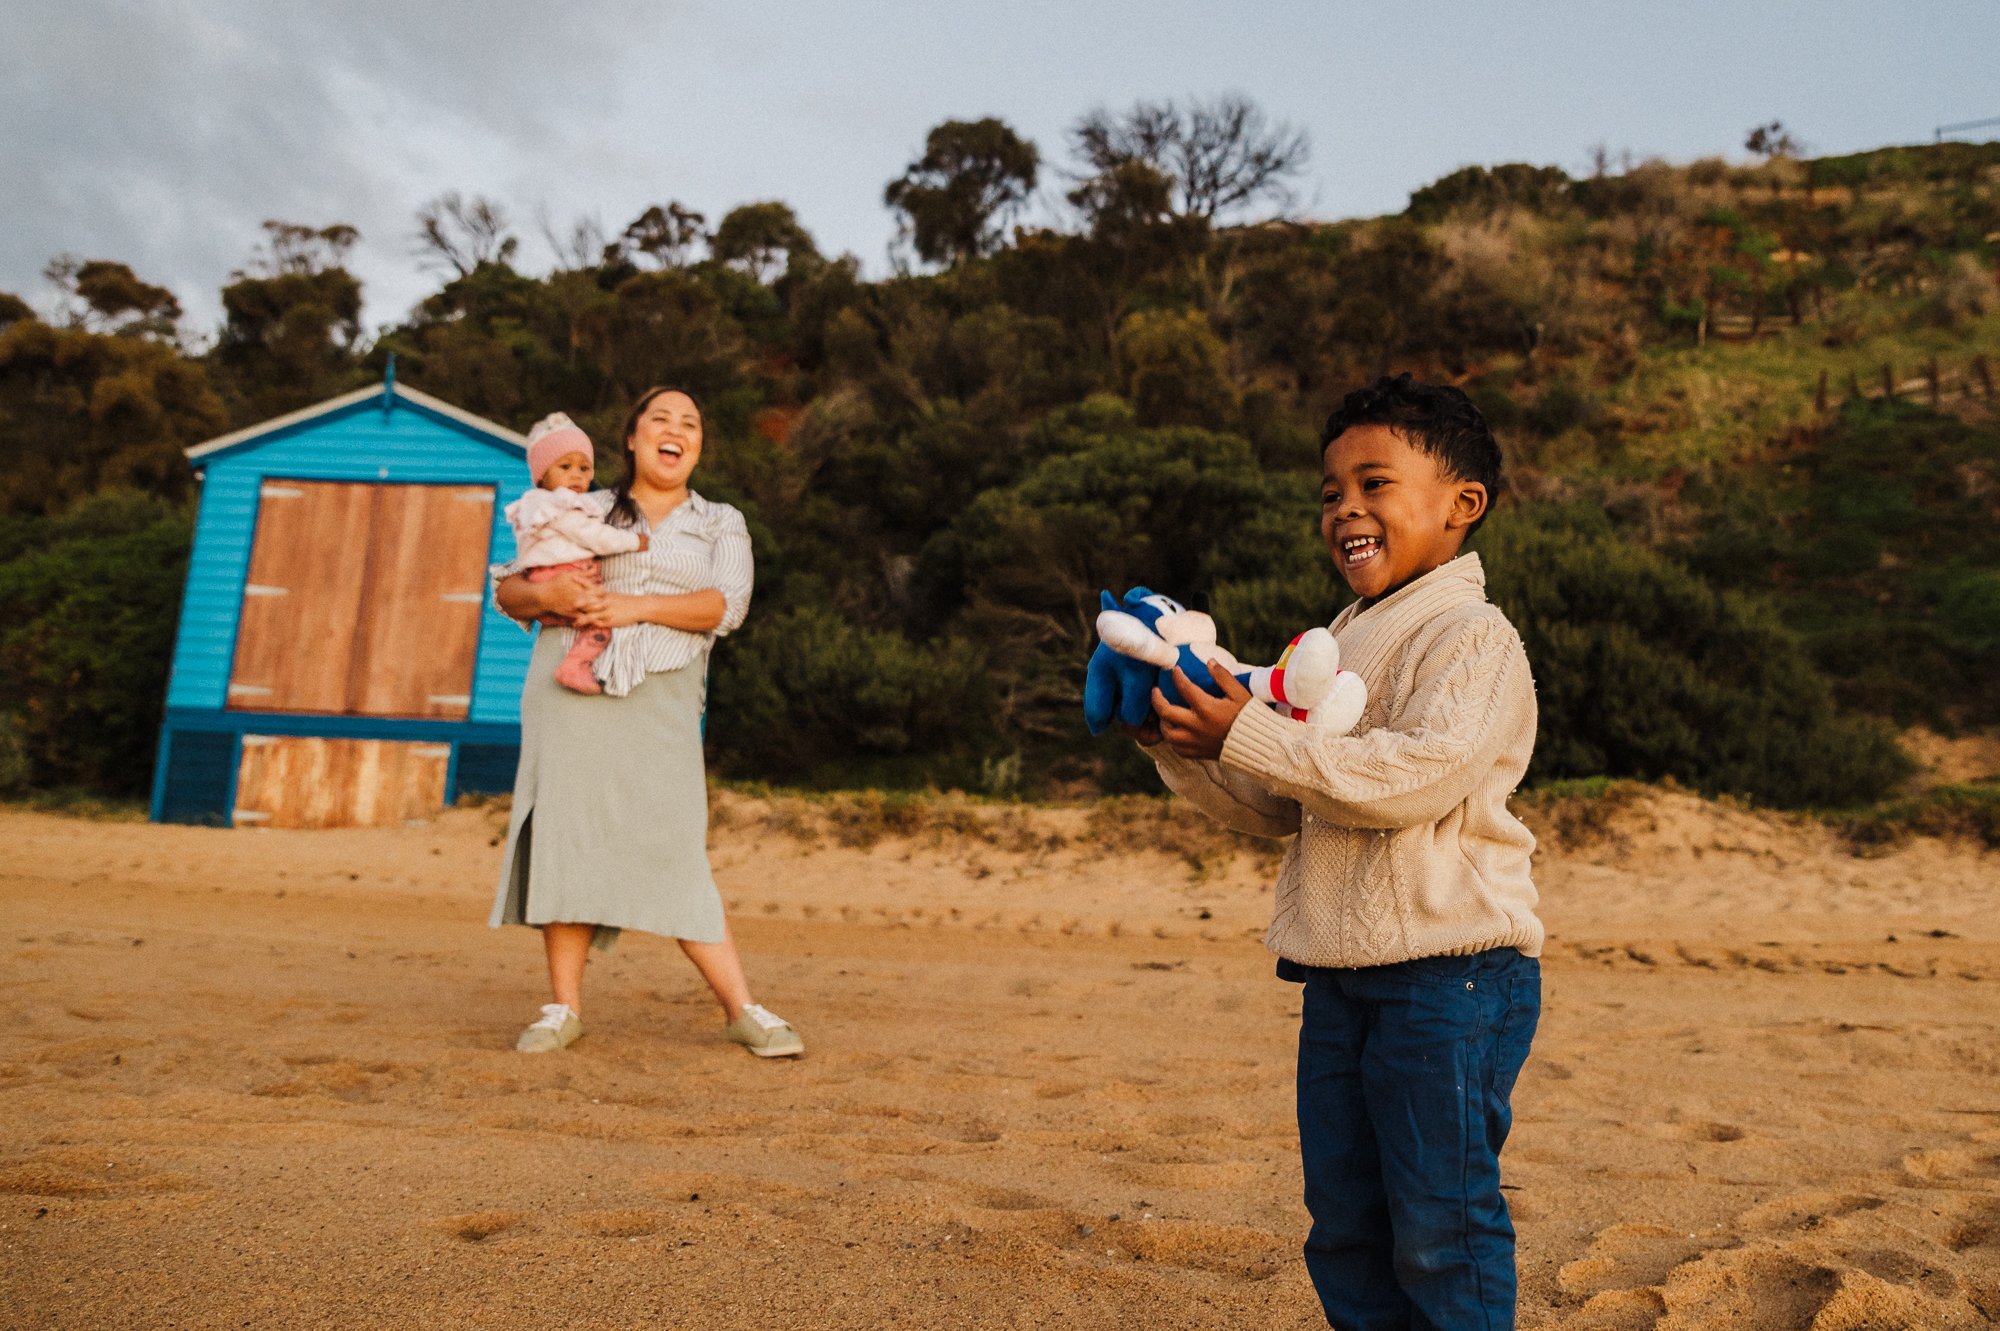 boy_laughing_holding_sonic_toy_mum_sisteer_laughing_beach_sunset_melbourne_family_photographer_jenny_rusby-1.jpg